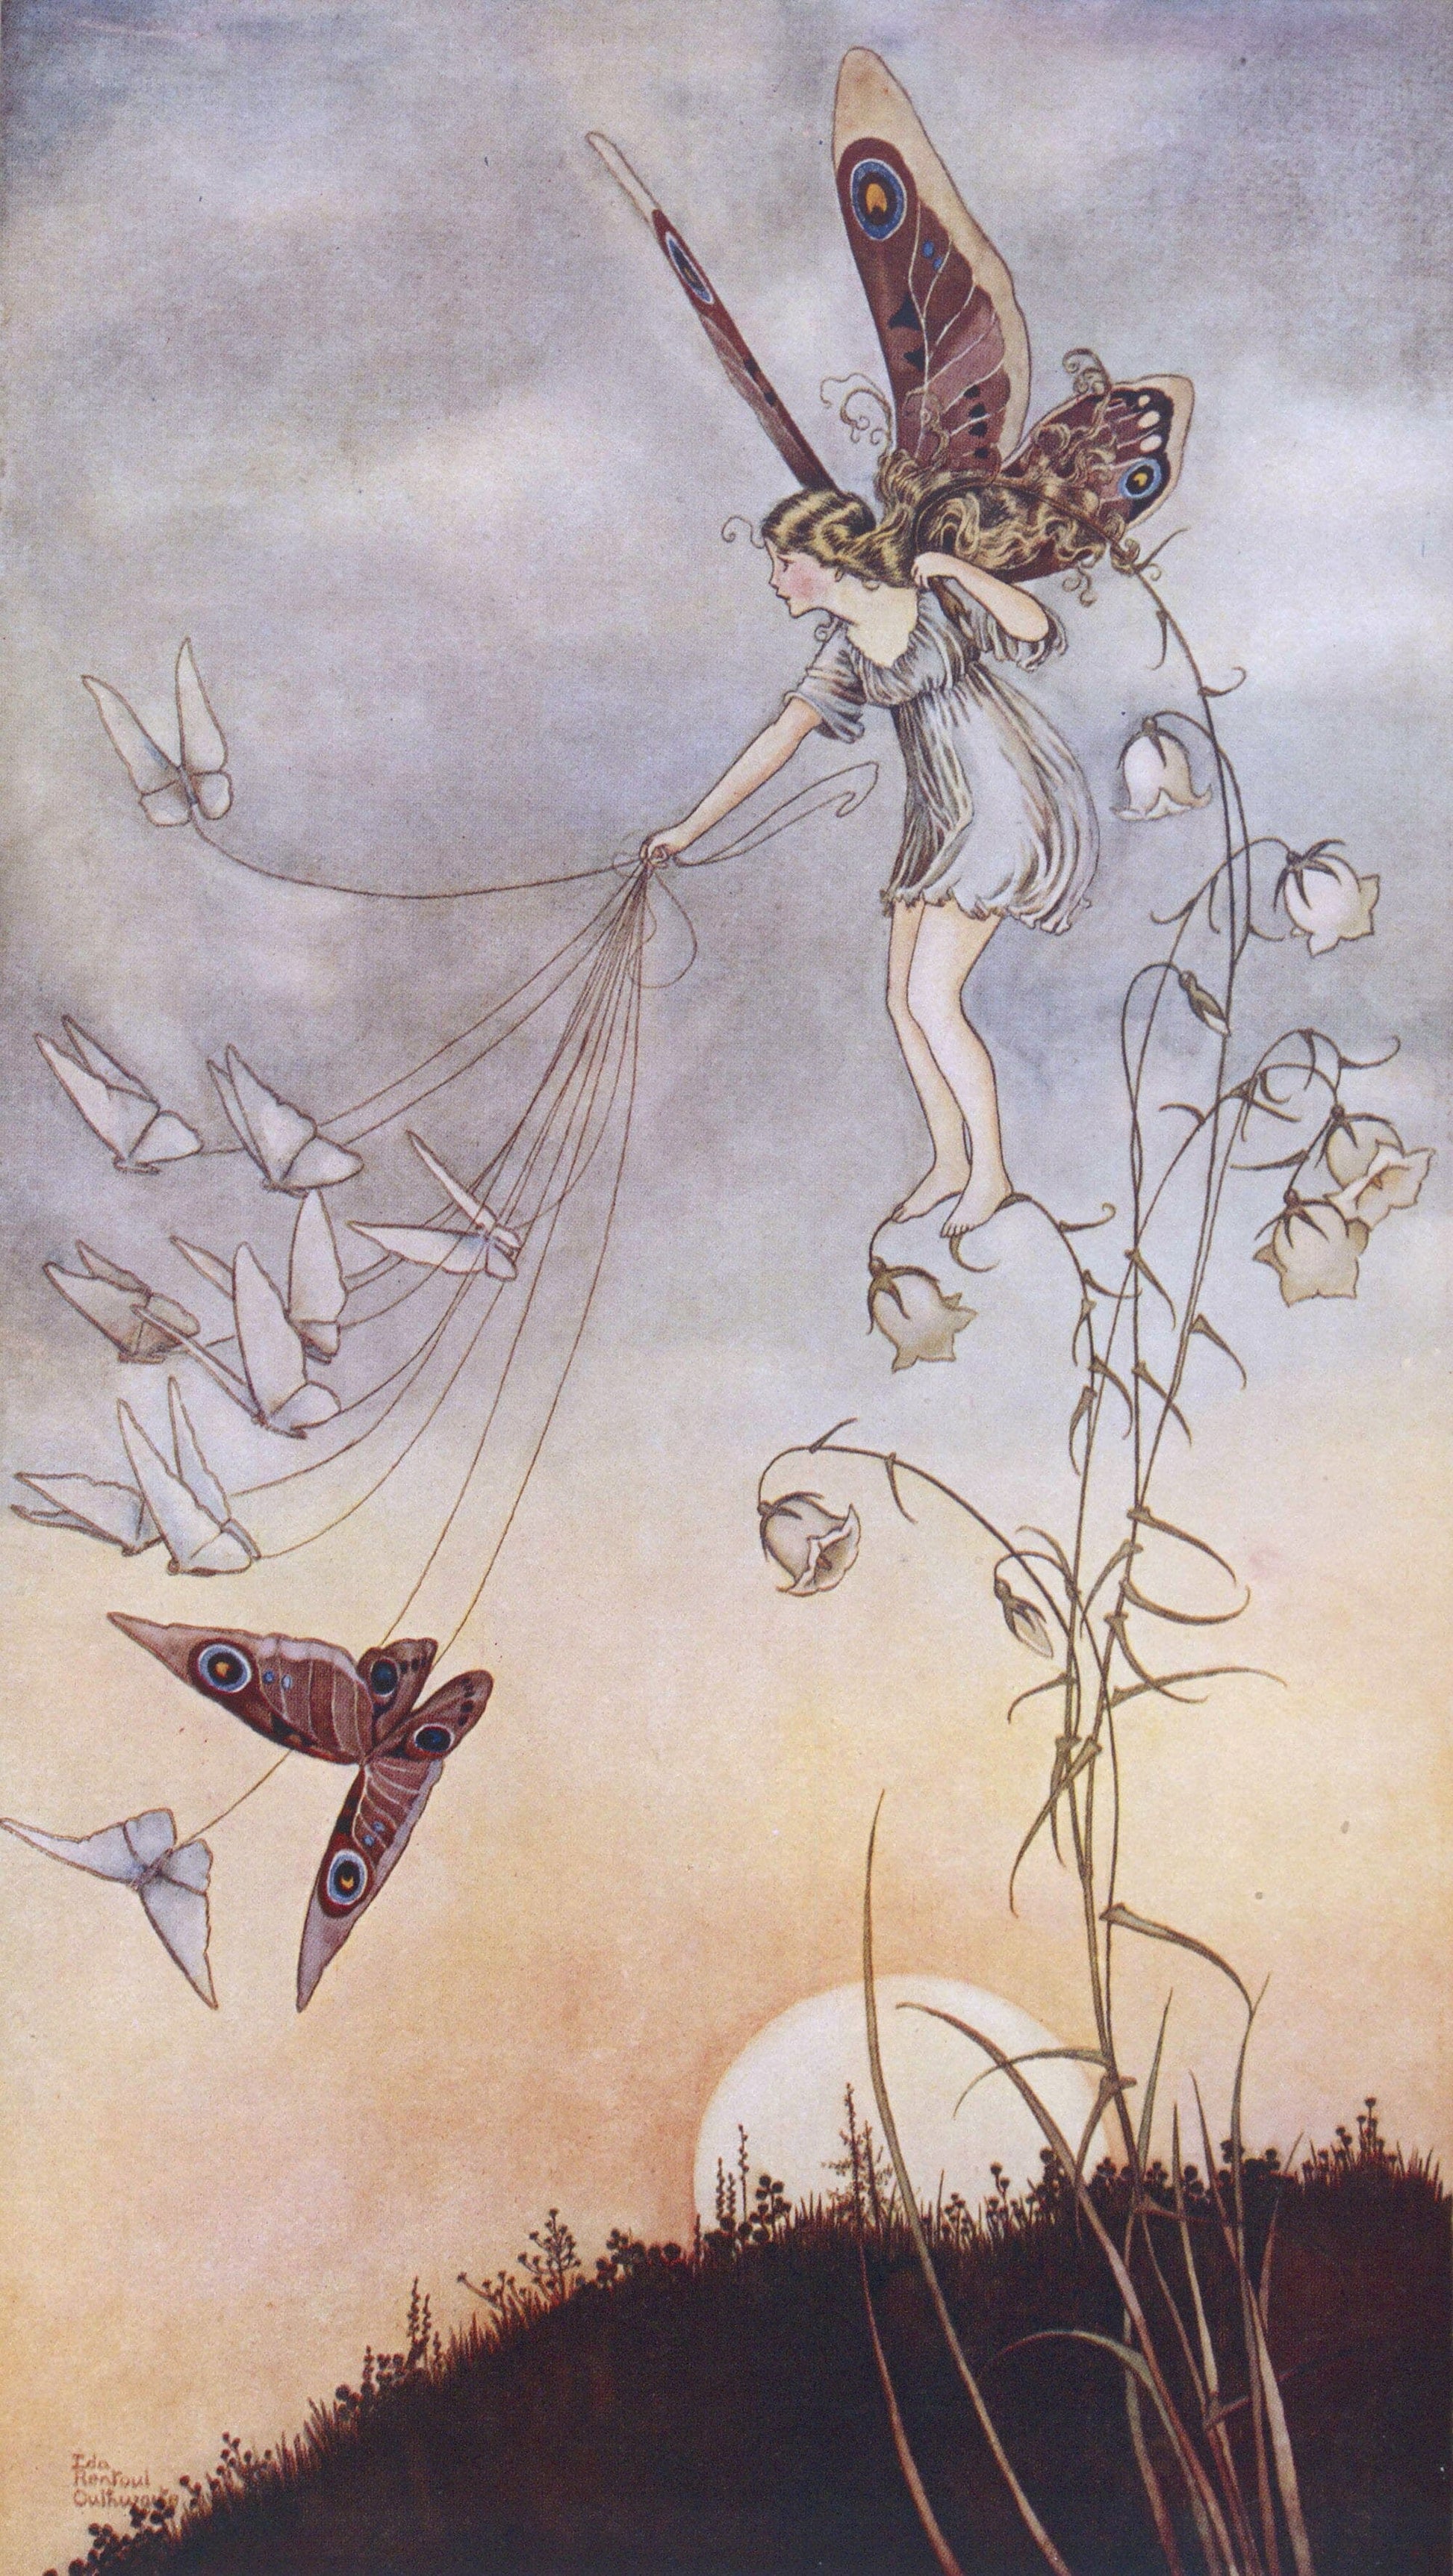 The Queen of the Butterflies (1919) | Fairy bedroom art print | Ida Rentoul Outhwaite Posters, Prints, & Visual Artwork The Trumpet Shop   